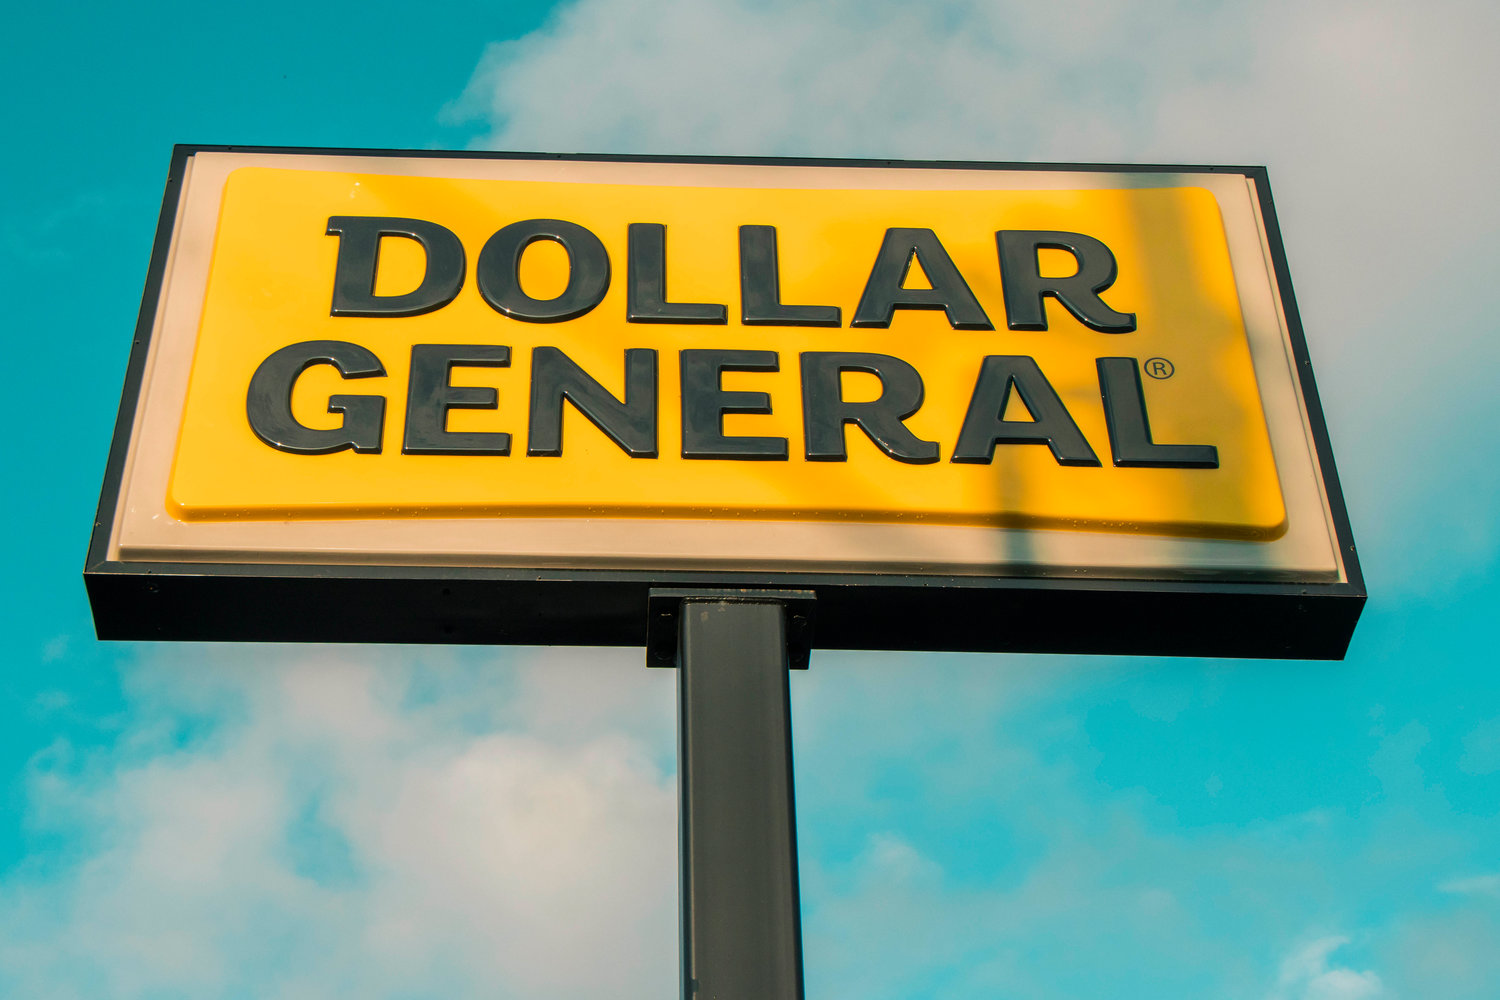 Comments Open For Harrison Avenue Dollar General Application The Daily Chronicle 4605